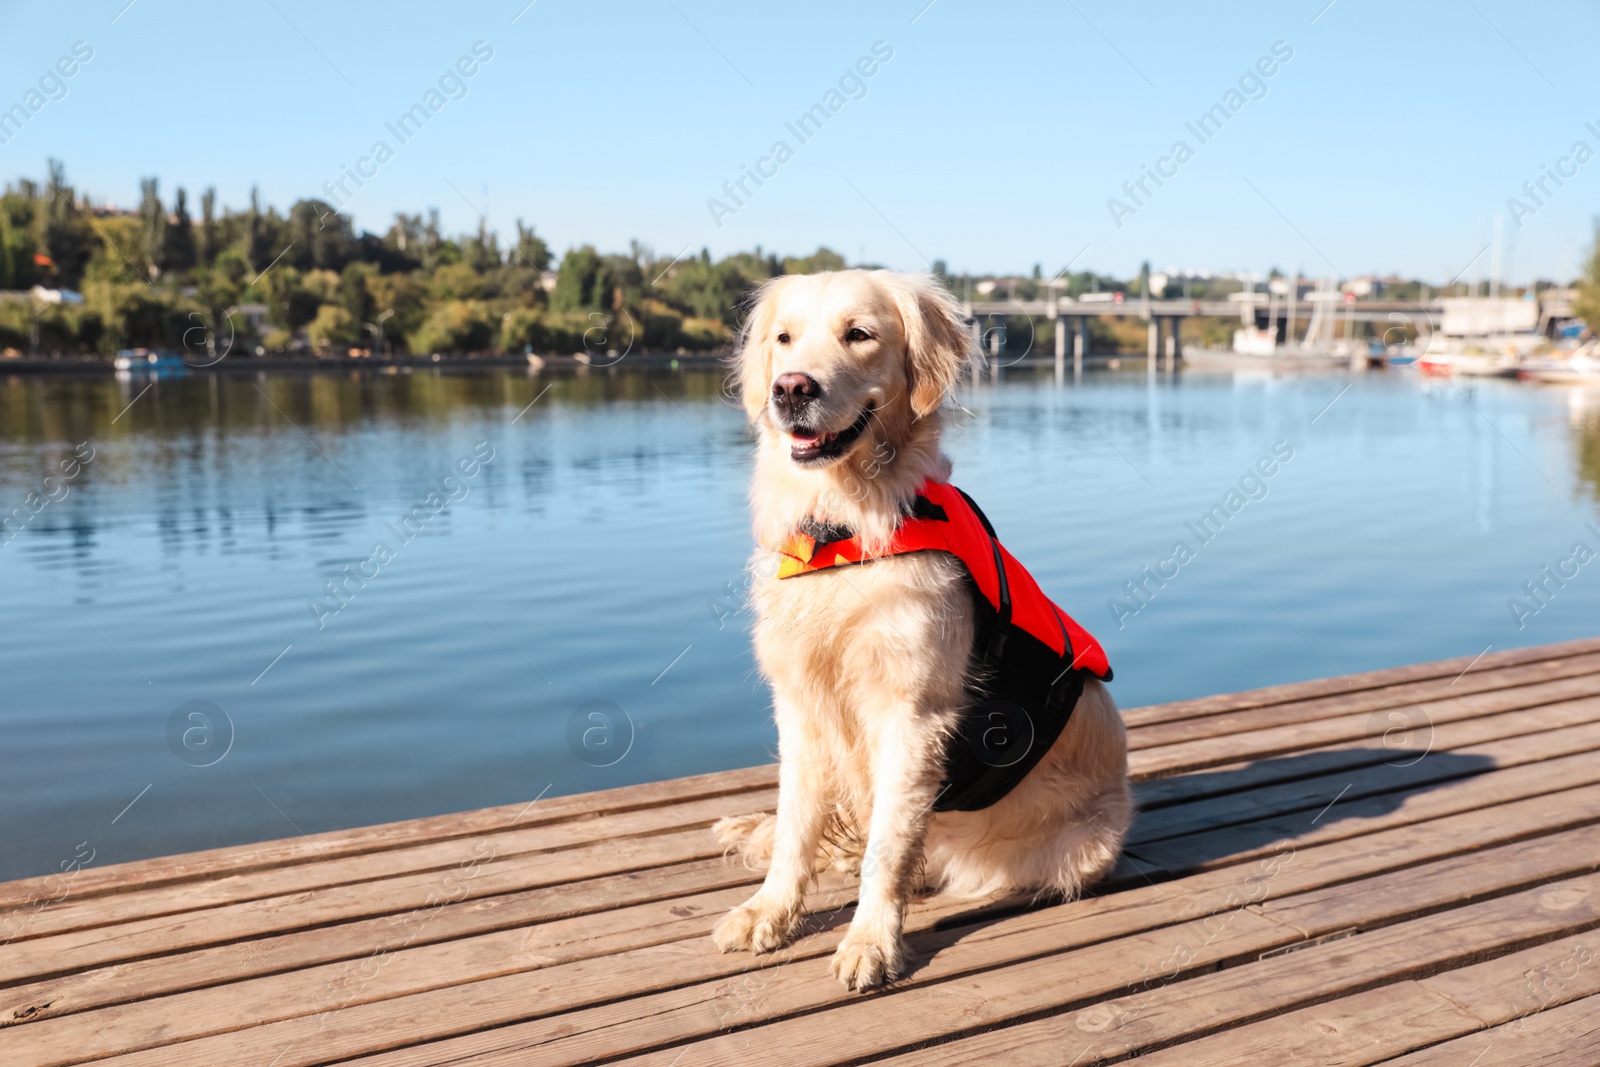 Photo of Dog rescuer in life vest on wooden deck near river